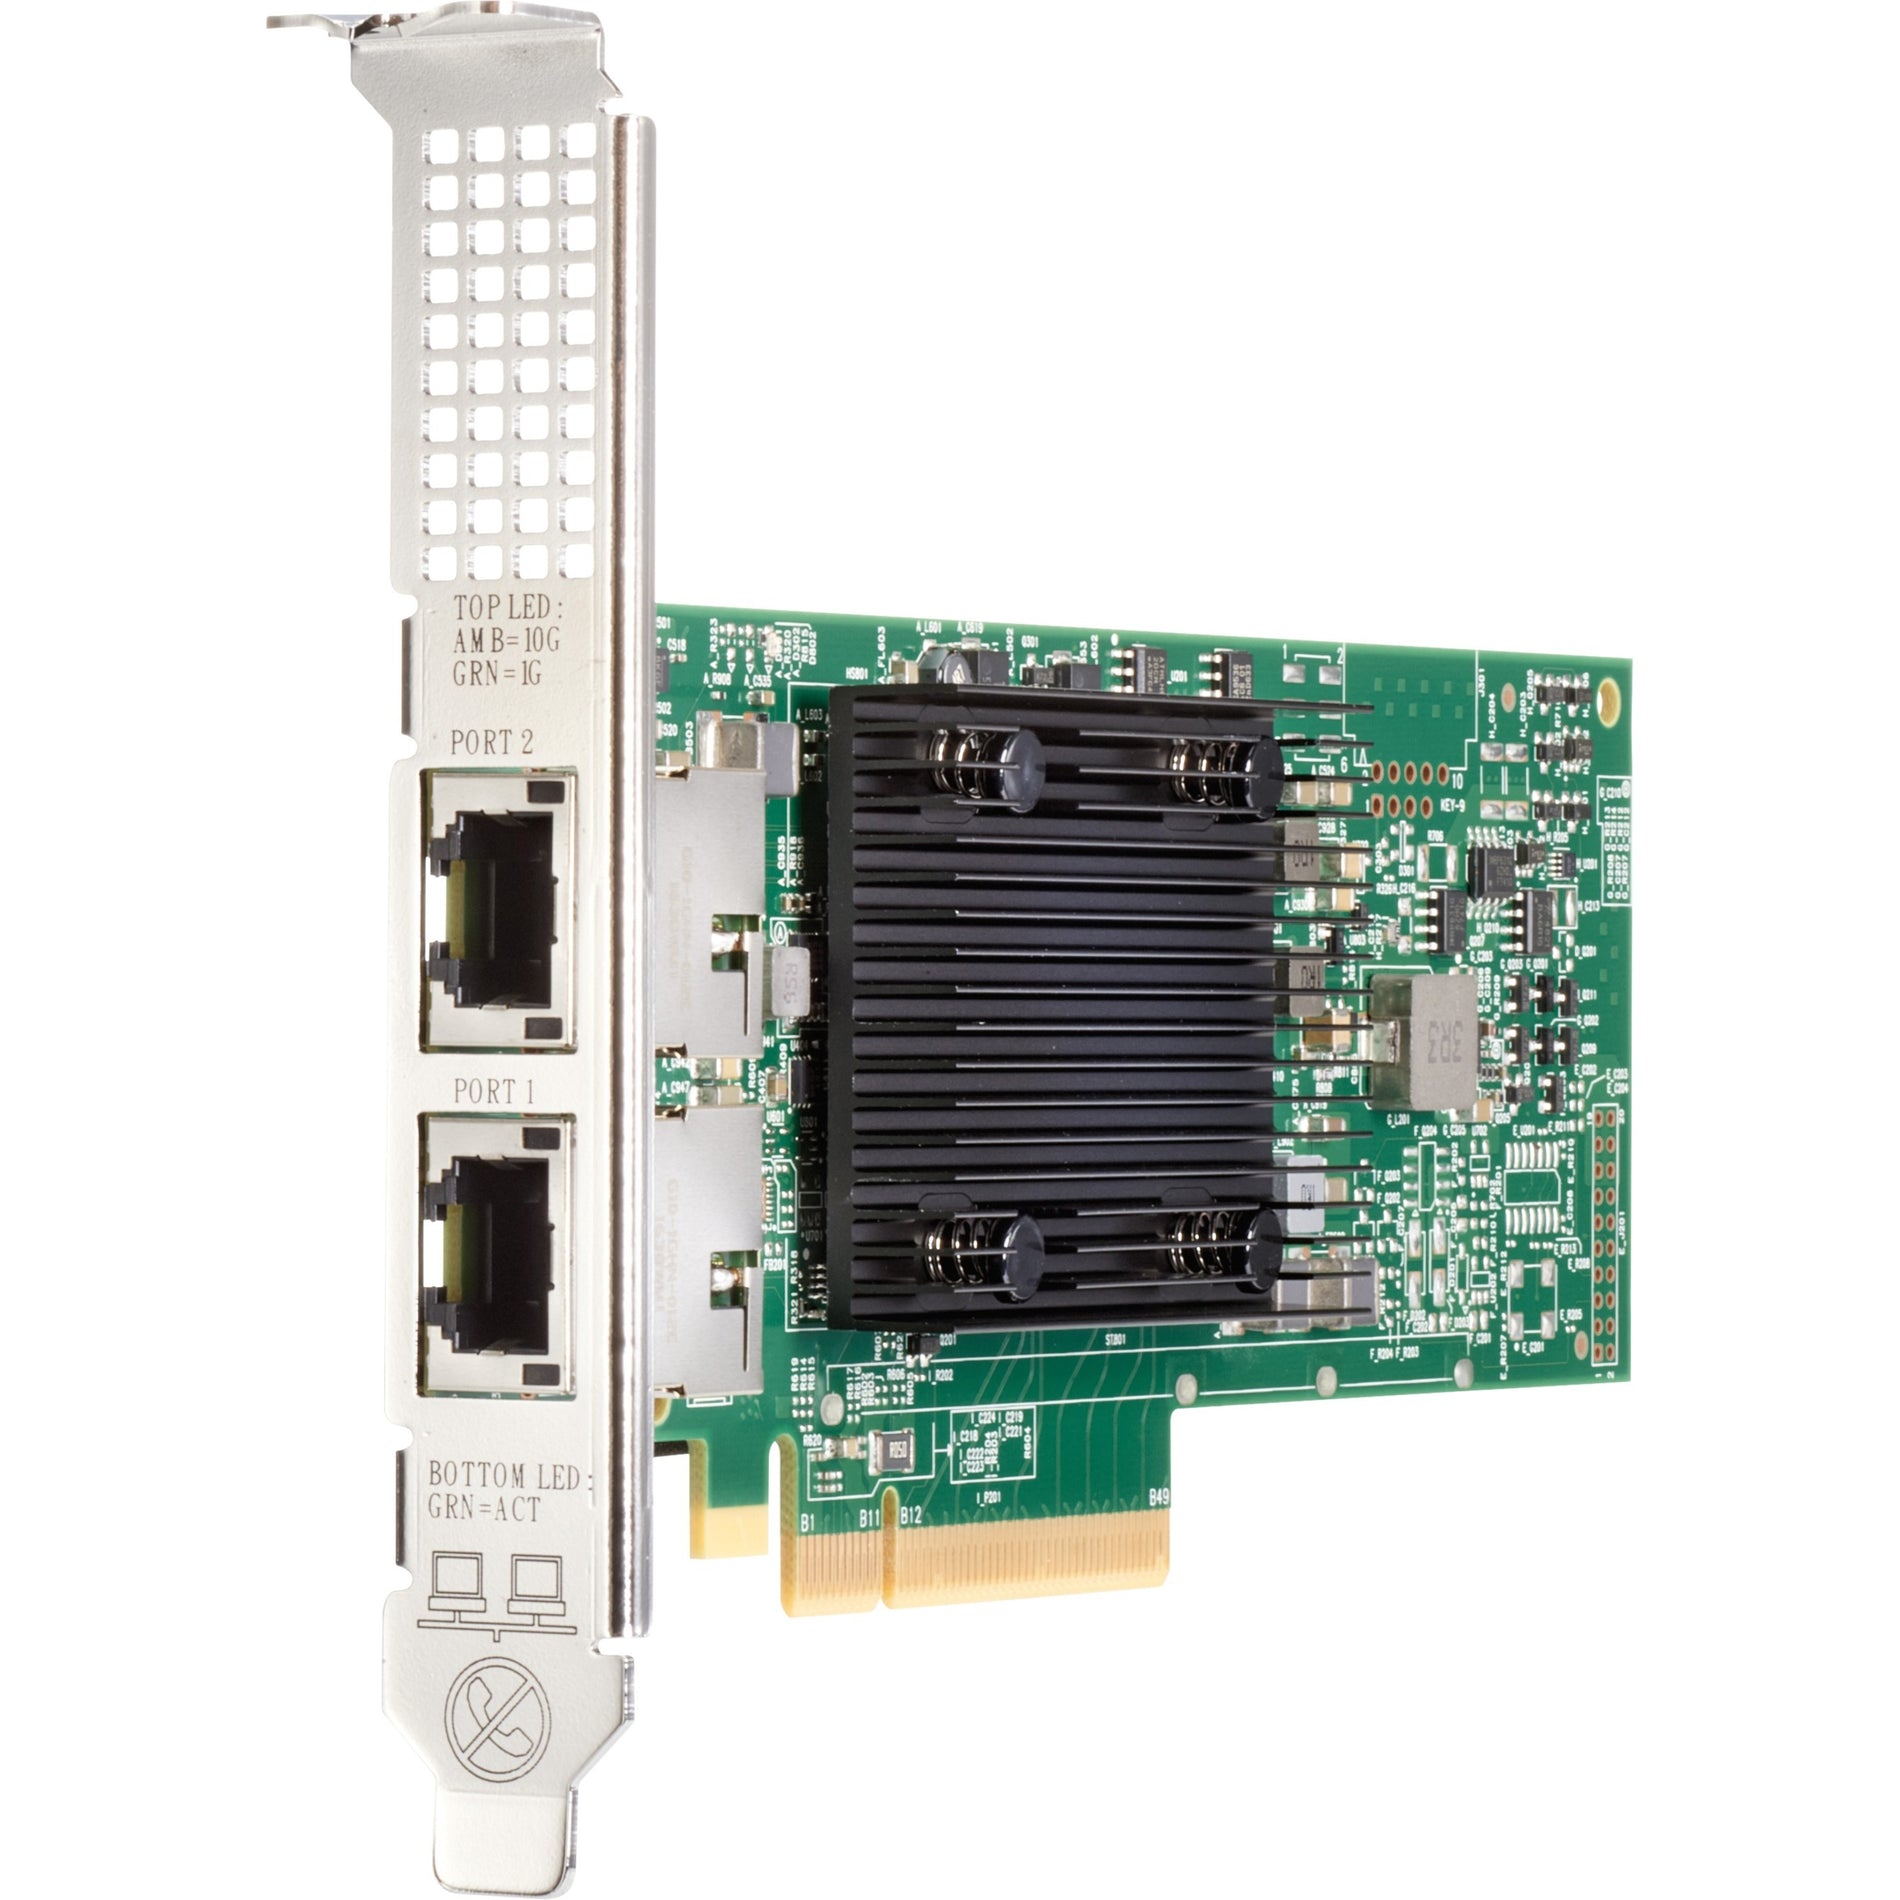 HPE 813661-B21 Ethernet 10Gb 2-port 535T Adapter, 10GBase-T, Twisted Pair